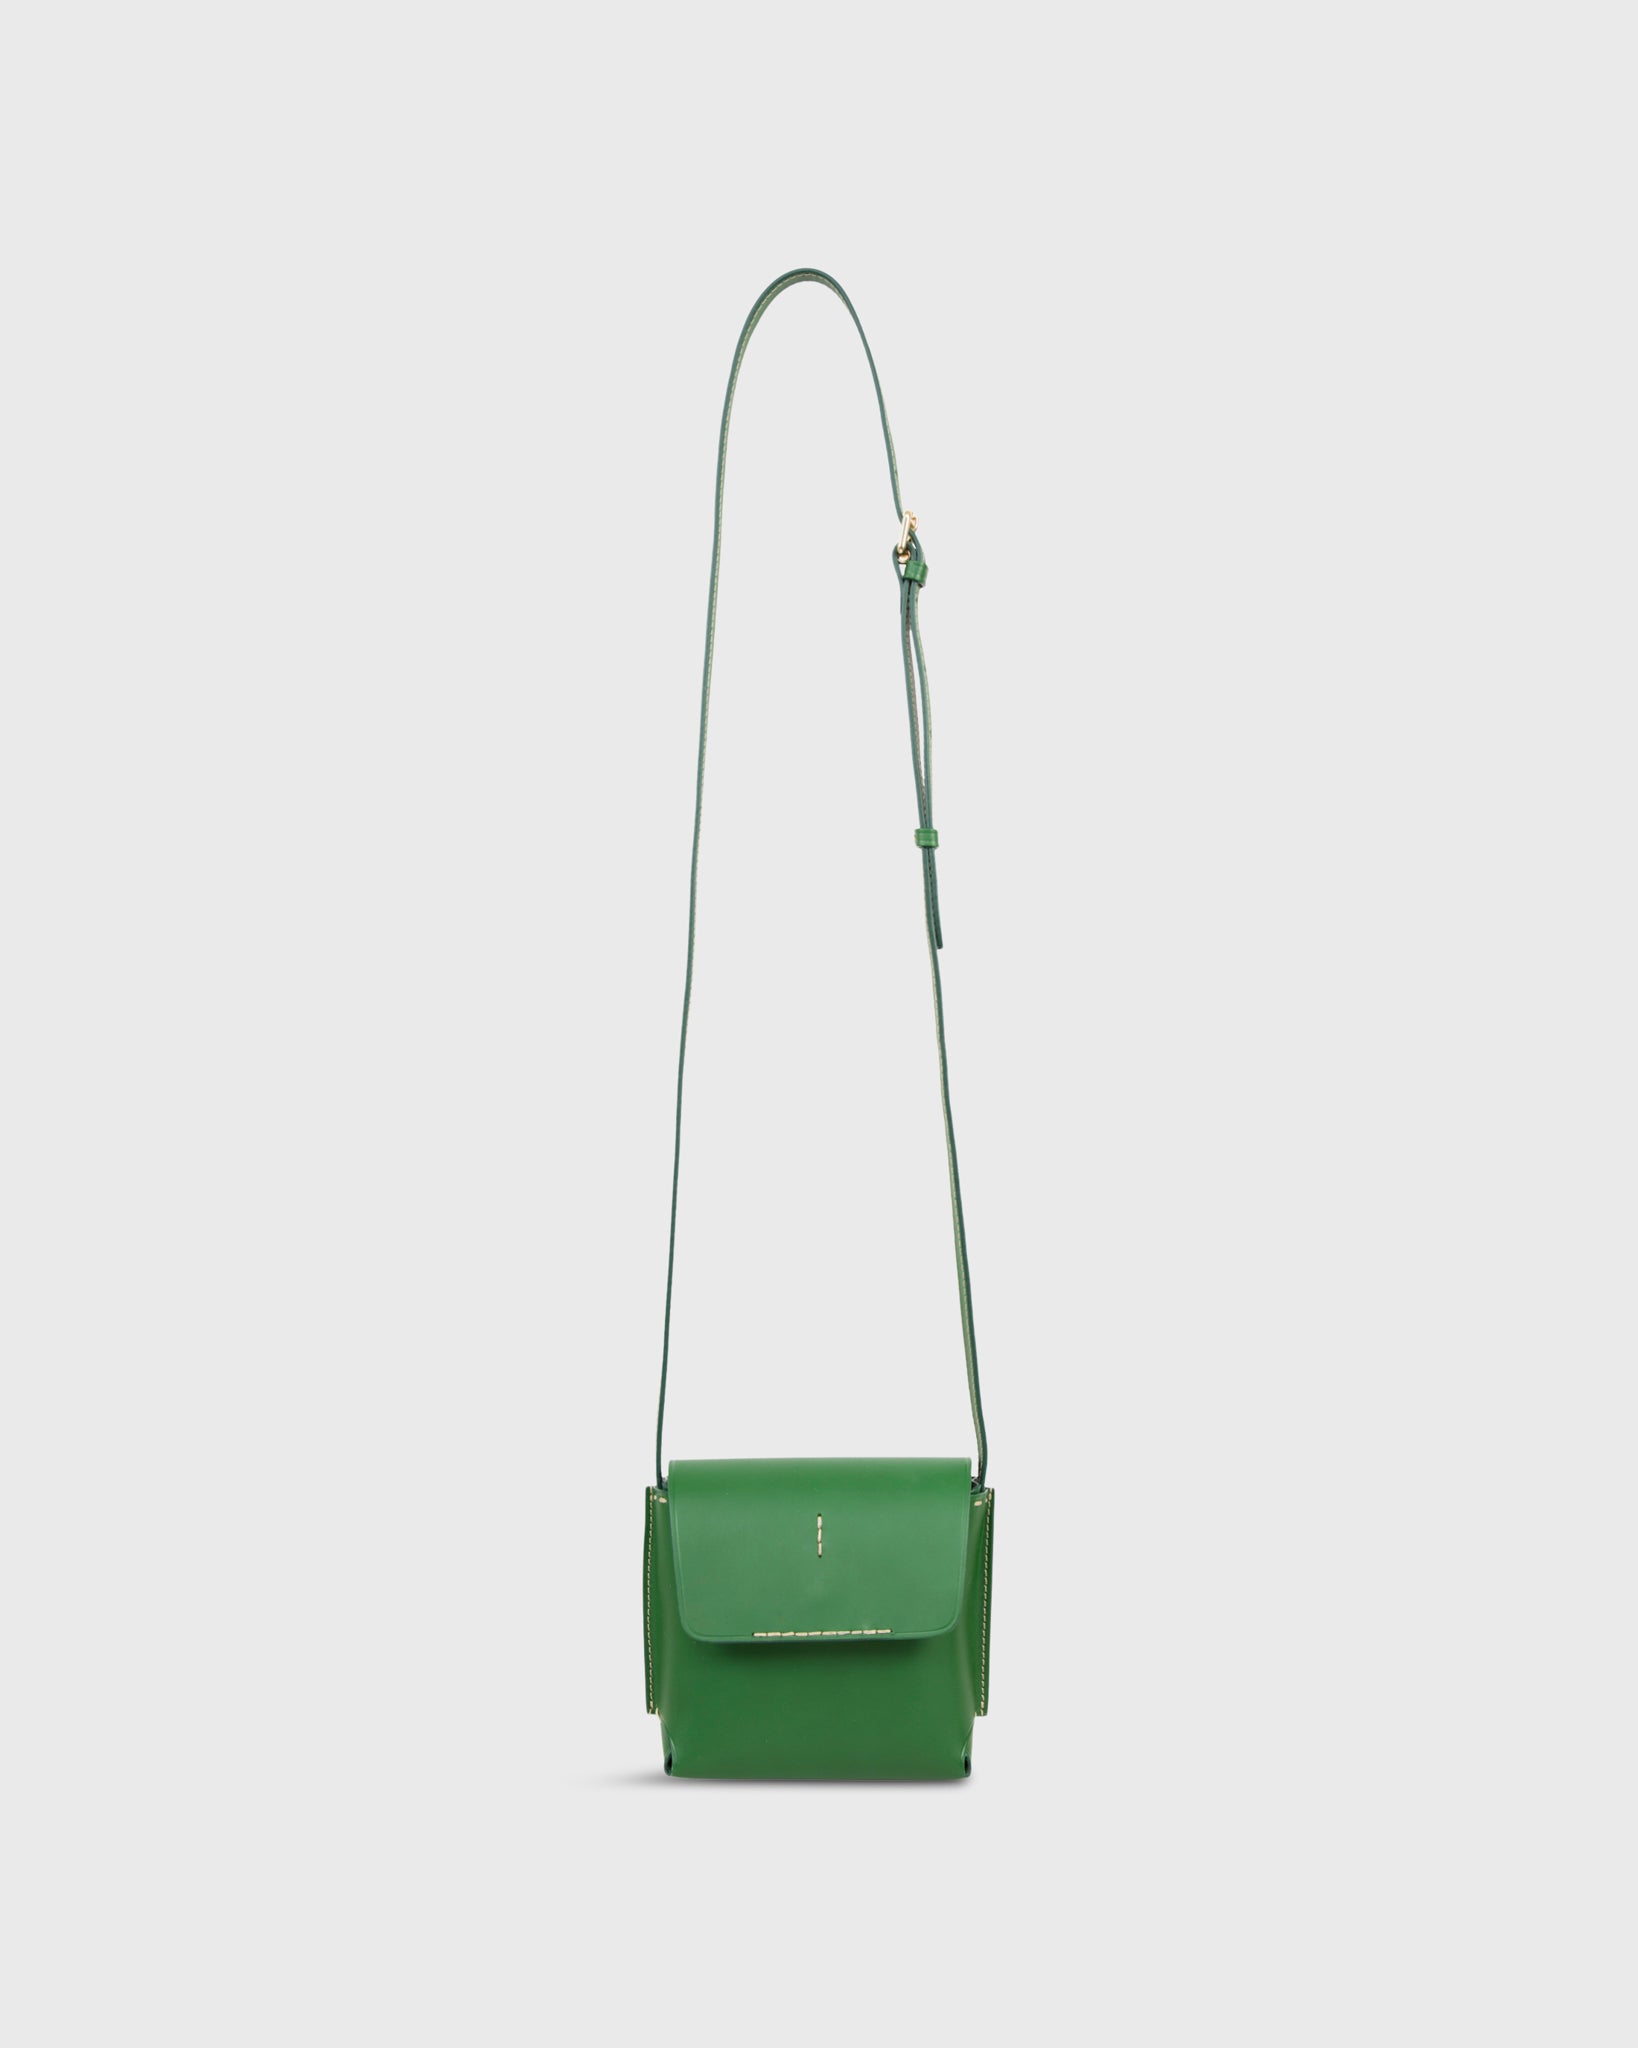 Lucette Crossbody Bag in Green Leather